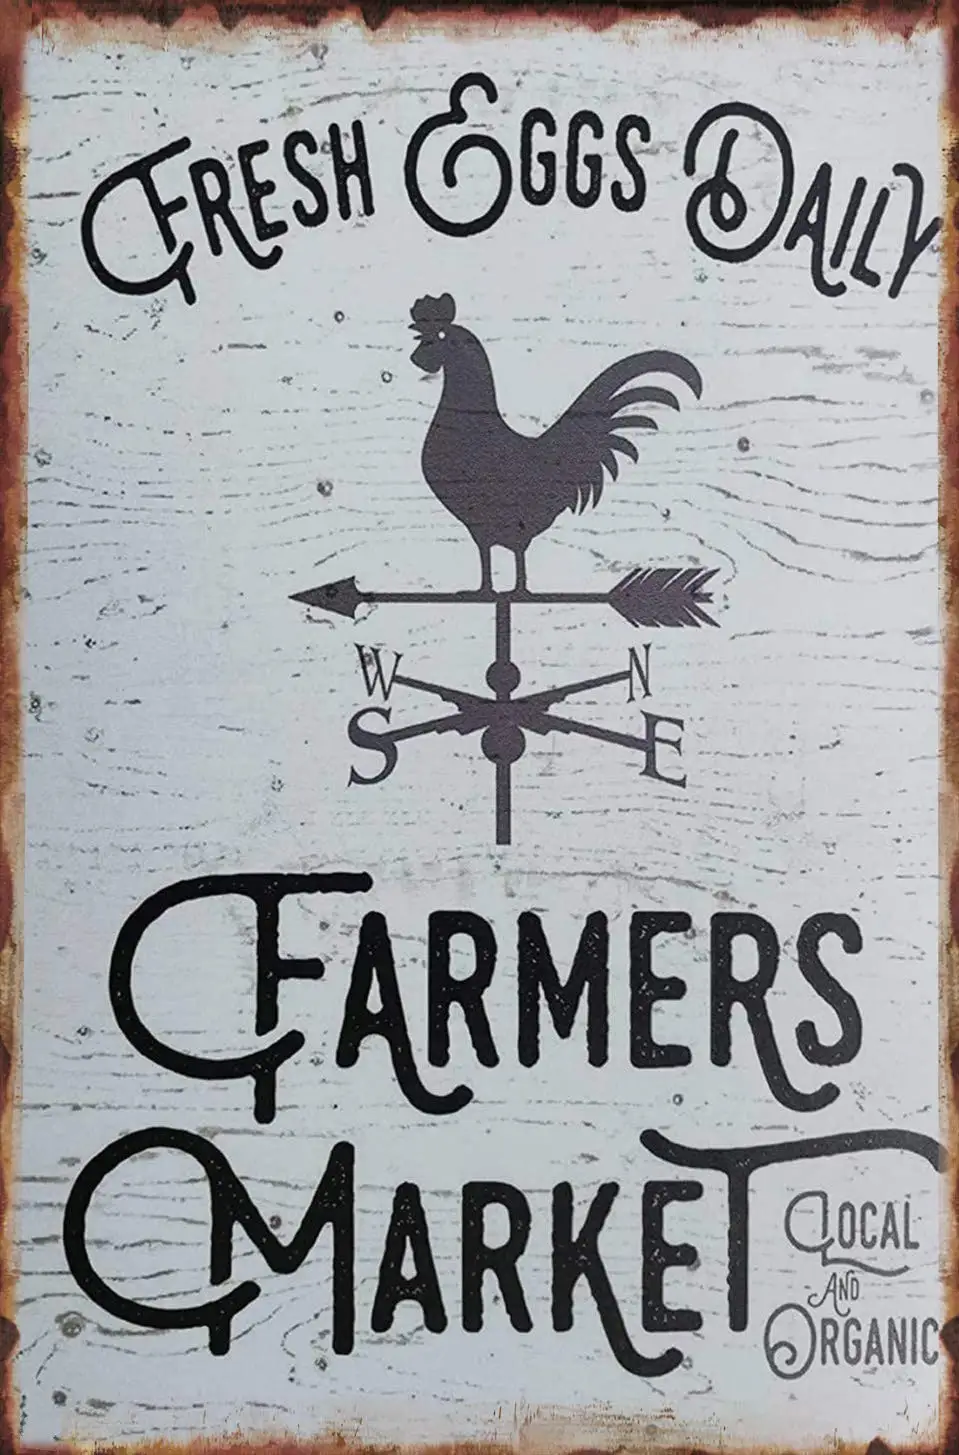 

Fresh Eggs Daily Vintage Farmers Market Wall Decoration Plaque Bar Farm Cafe Metal Sign 8x12 Inches